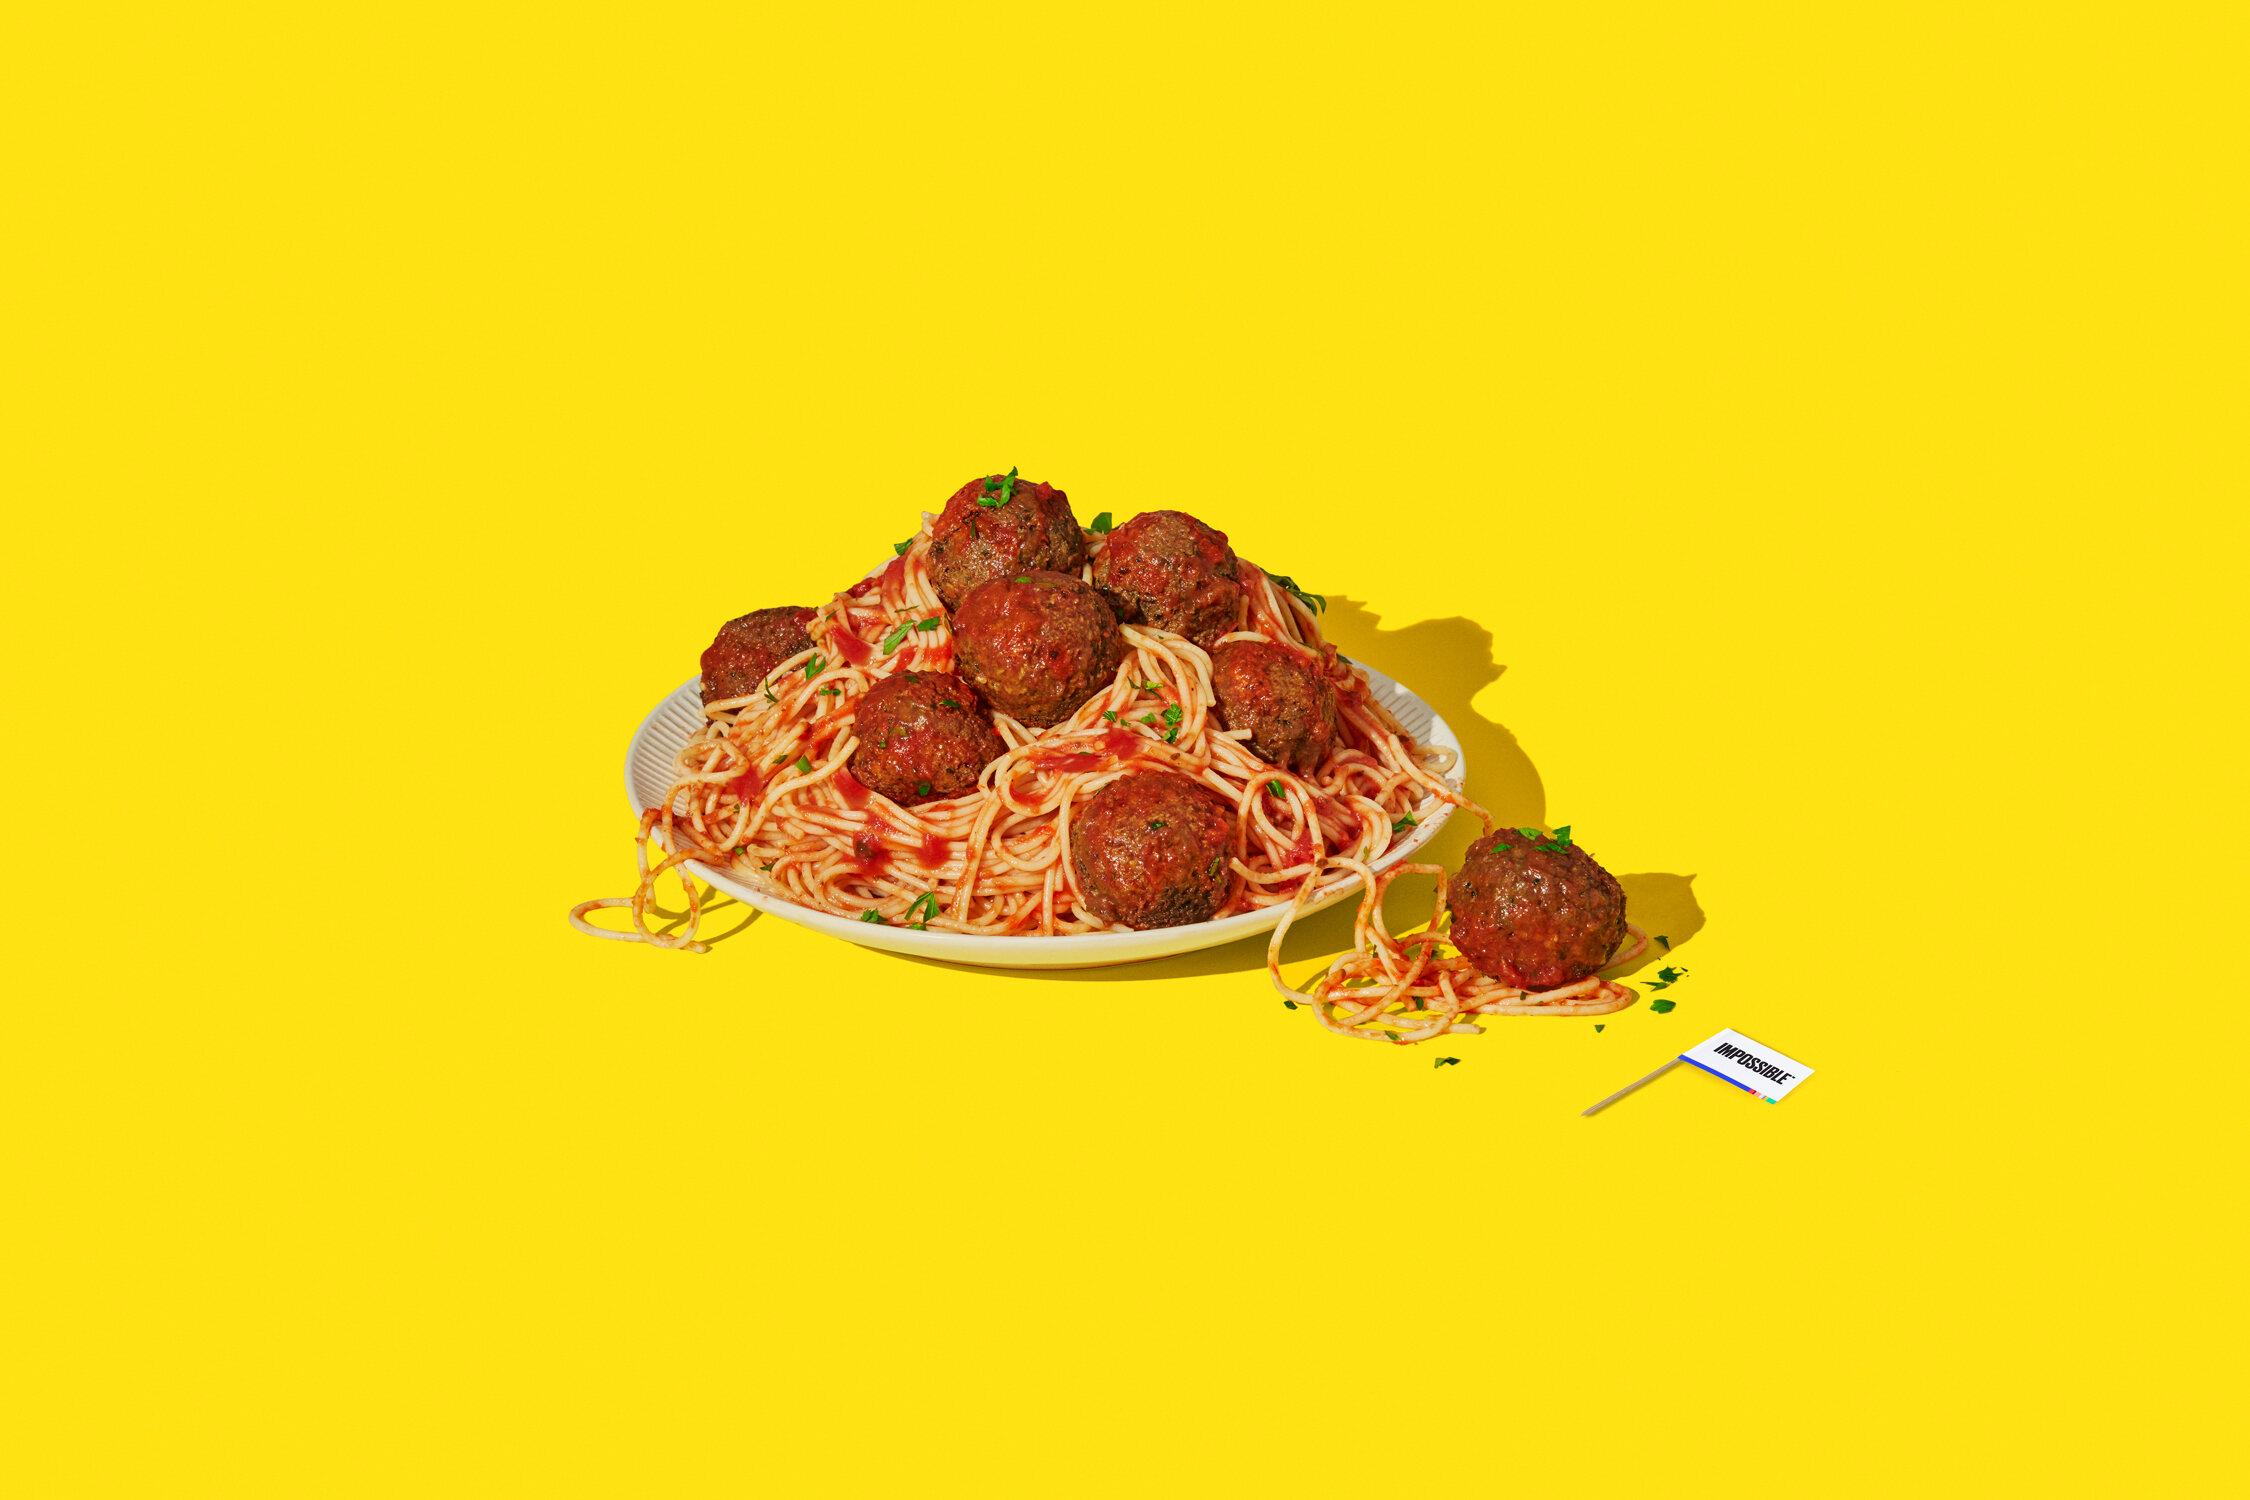 180514_IMPOSSIBLE_FOODS_PRODUCT_MEATBALLS_4437-v2.jpg